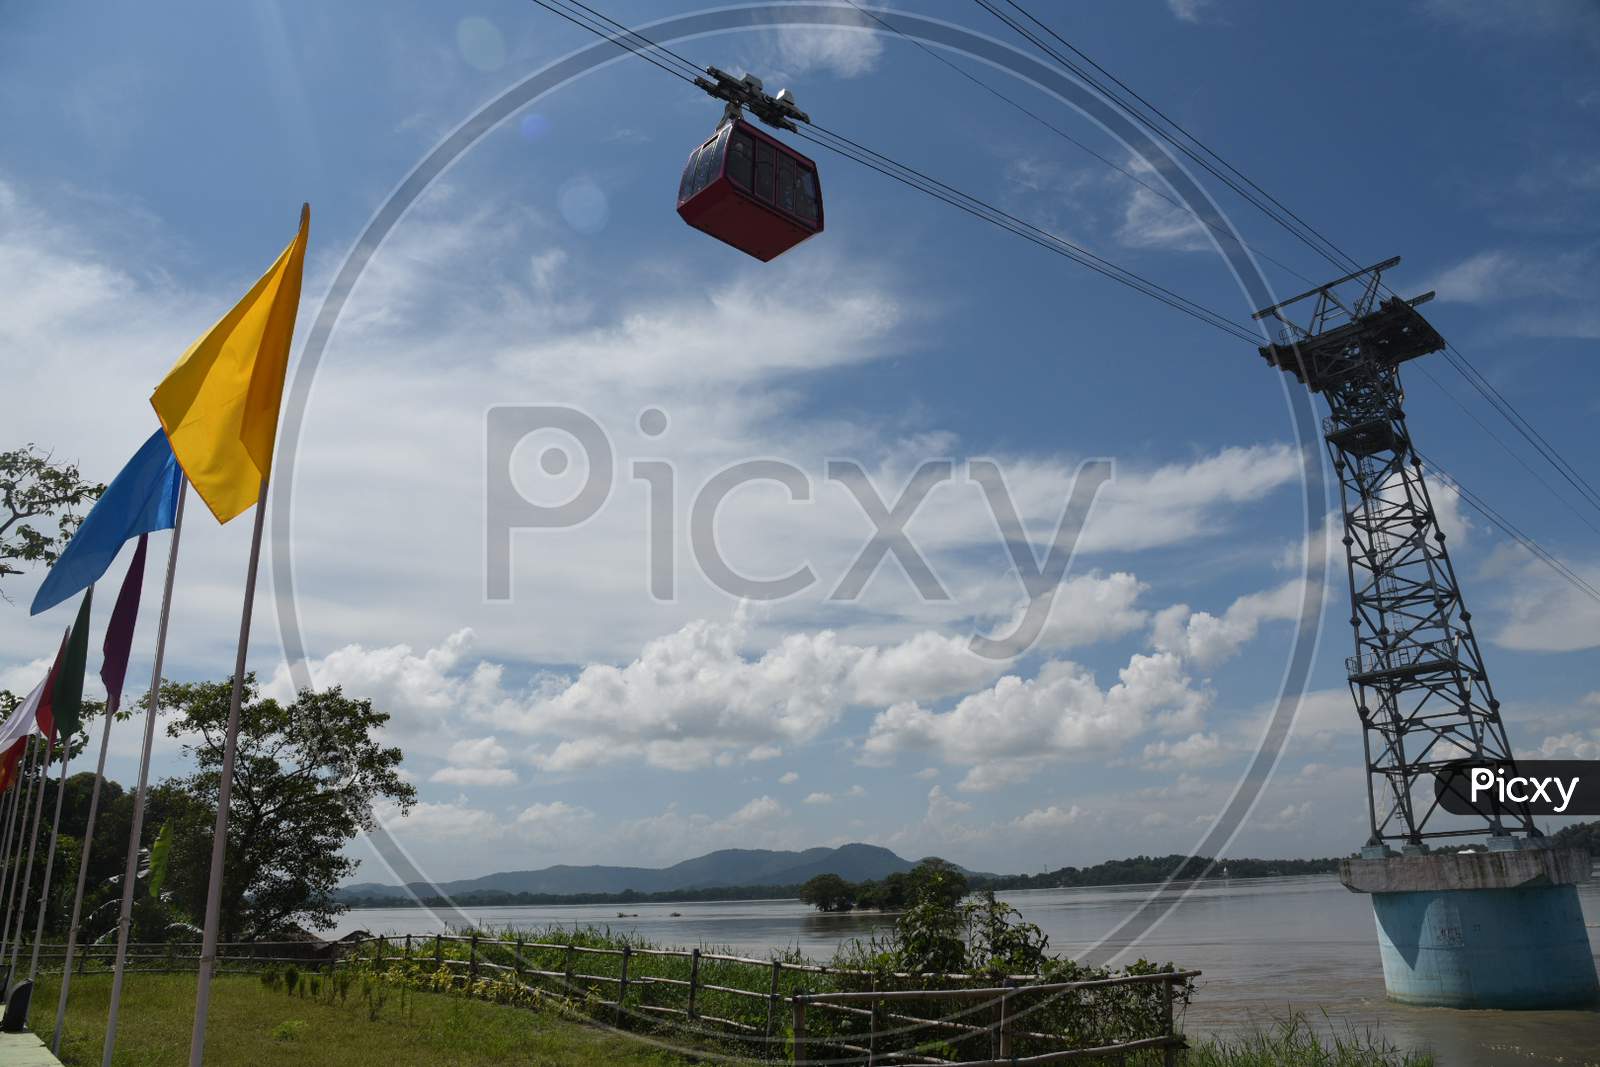 People Travel In Cable Car Cabins In India's Longest River Ropeway Over The River Brahmaputra, In Guwahati On August 24, 2020.